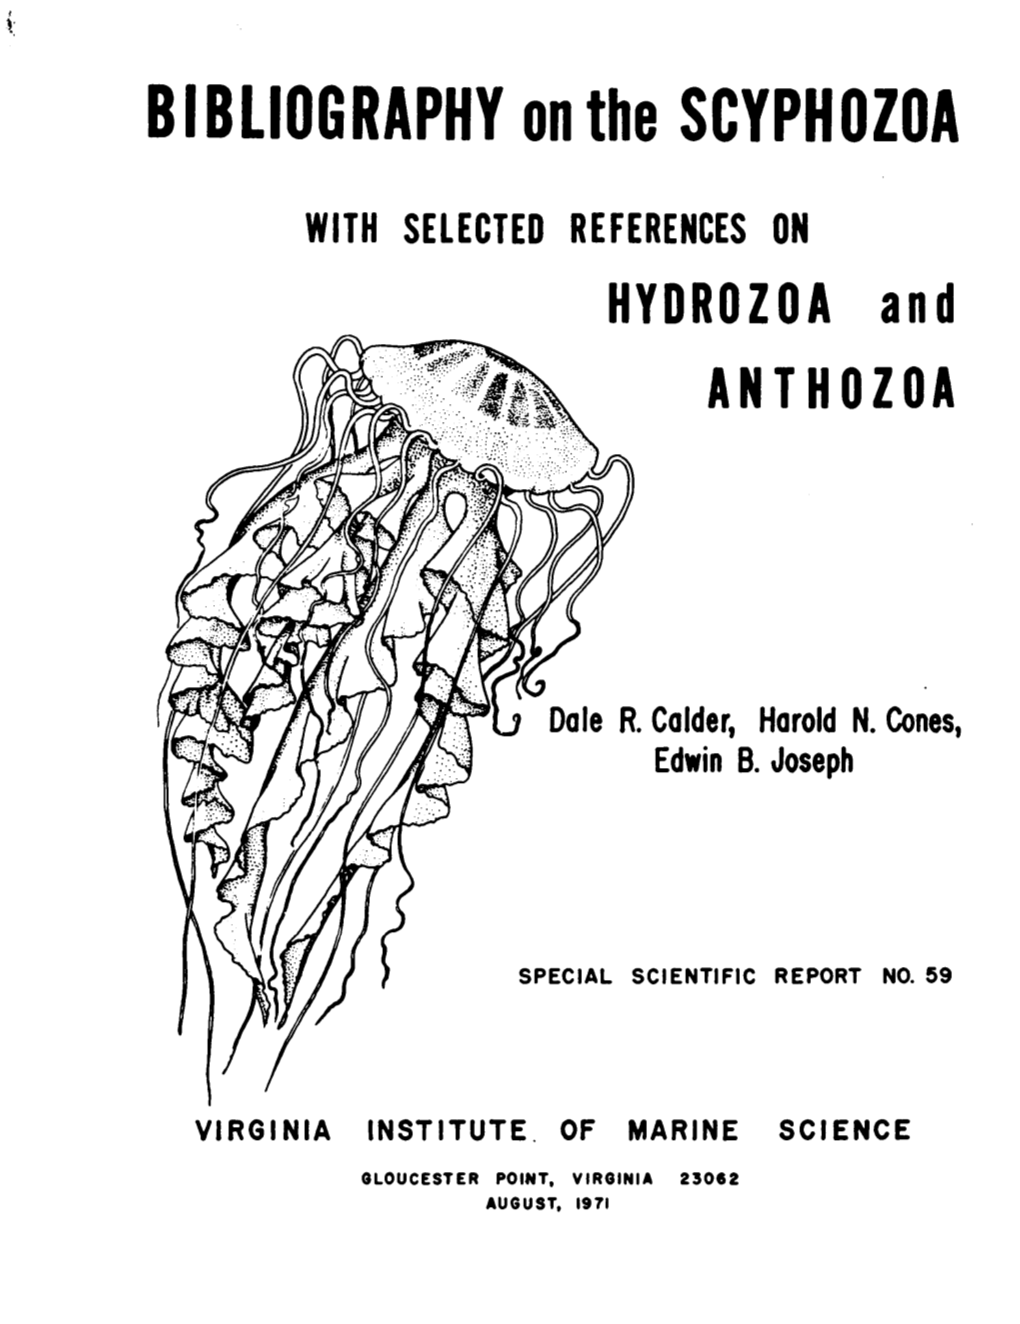 Bibliography on the Scyphozoa with Selected References on Hydrozoa